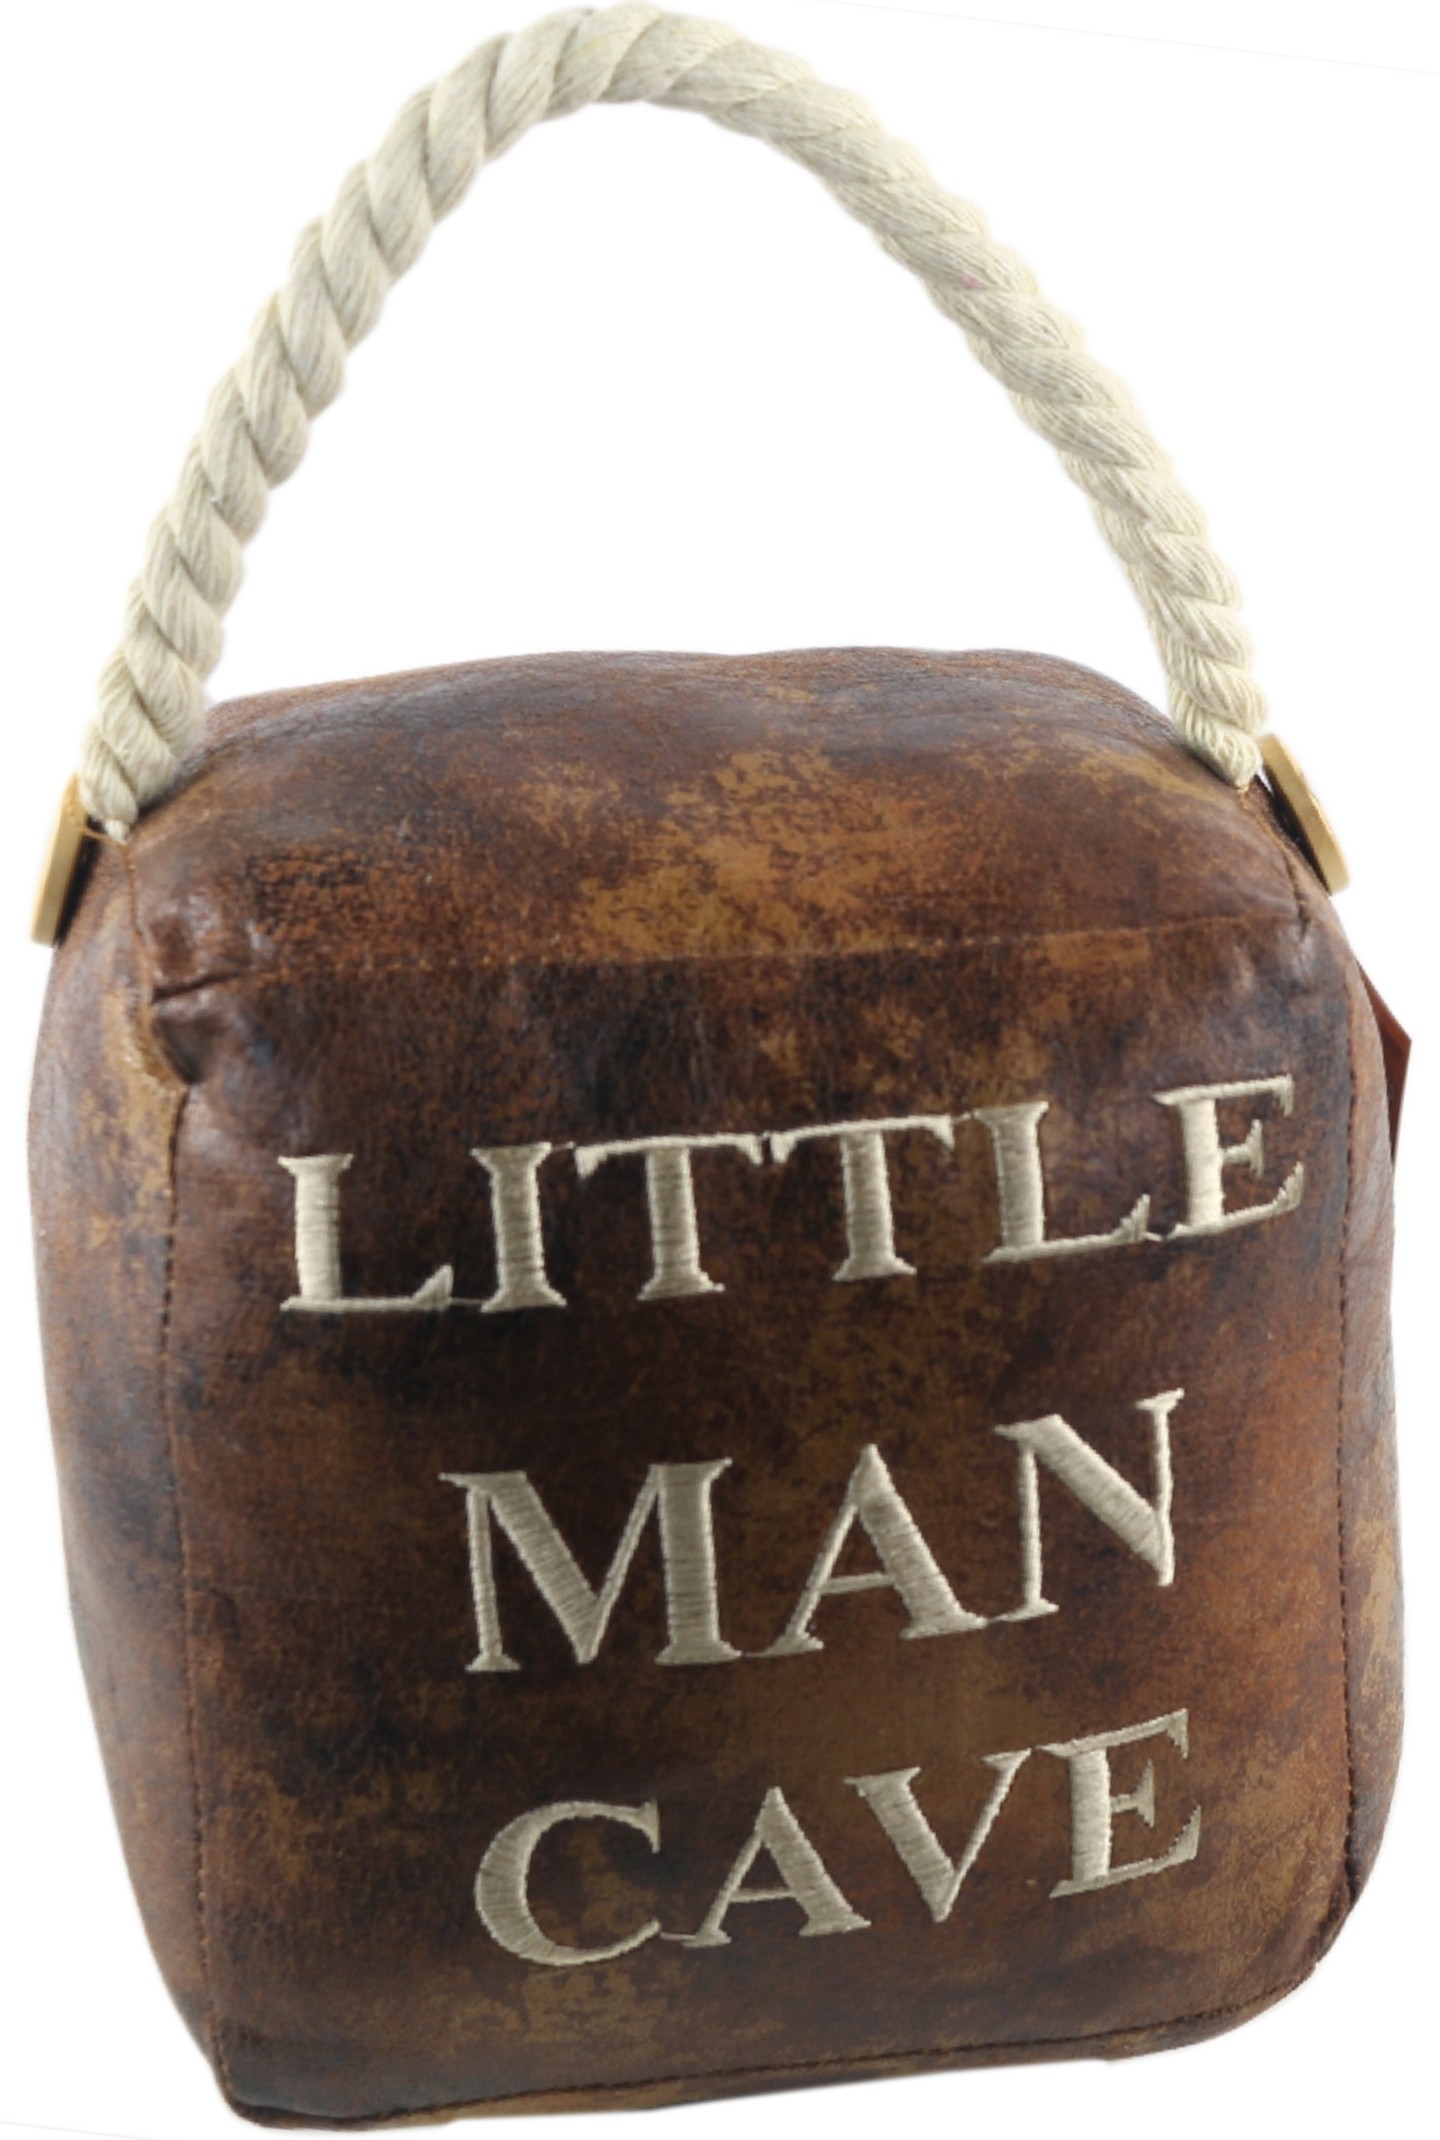 16cm Faux Leather Little Man Cave Doorstop (Case Price for Case Qty Only)